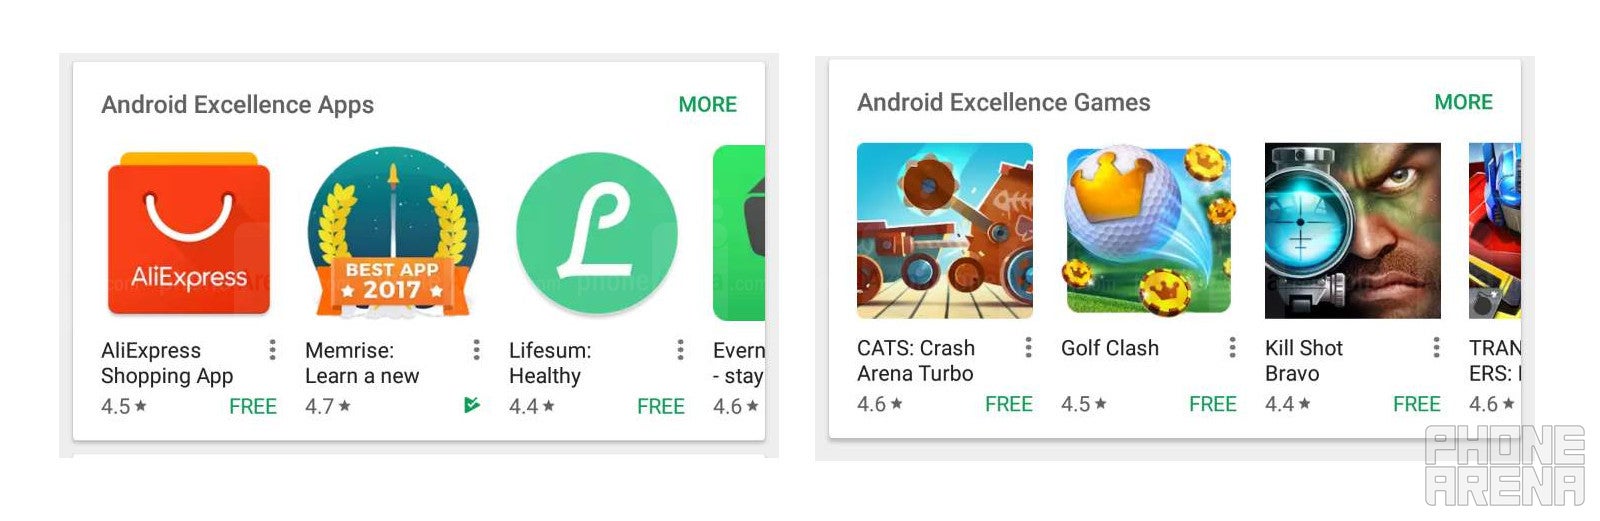 Android Excellence Apps and Games collections - Android Excellence is Google&#039;s answer to the new iOS 11 App Store